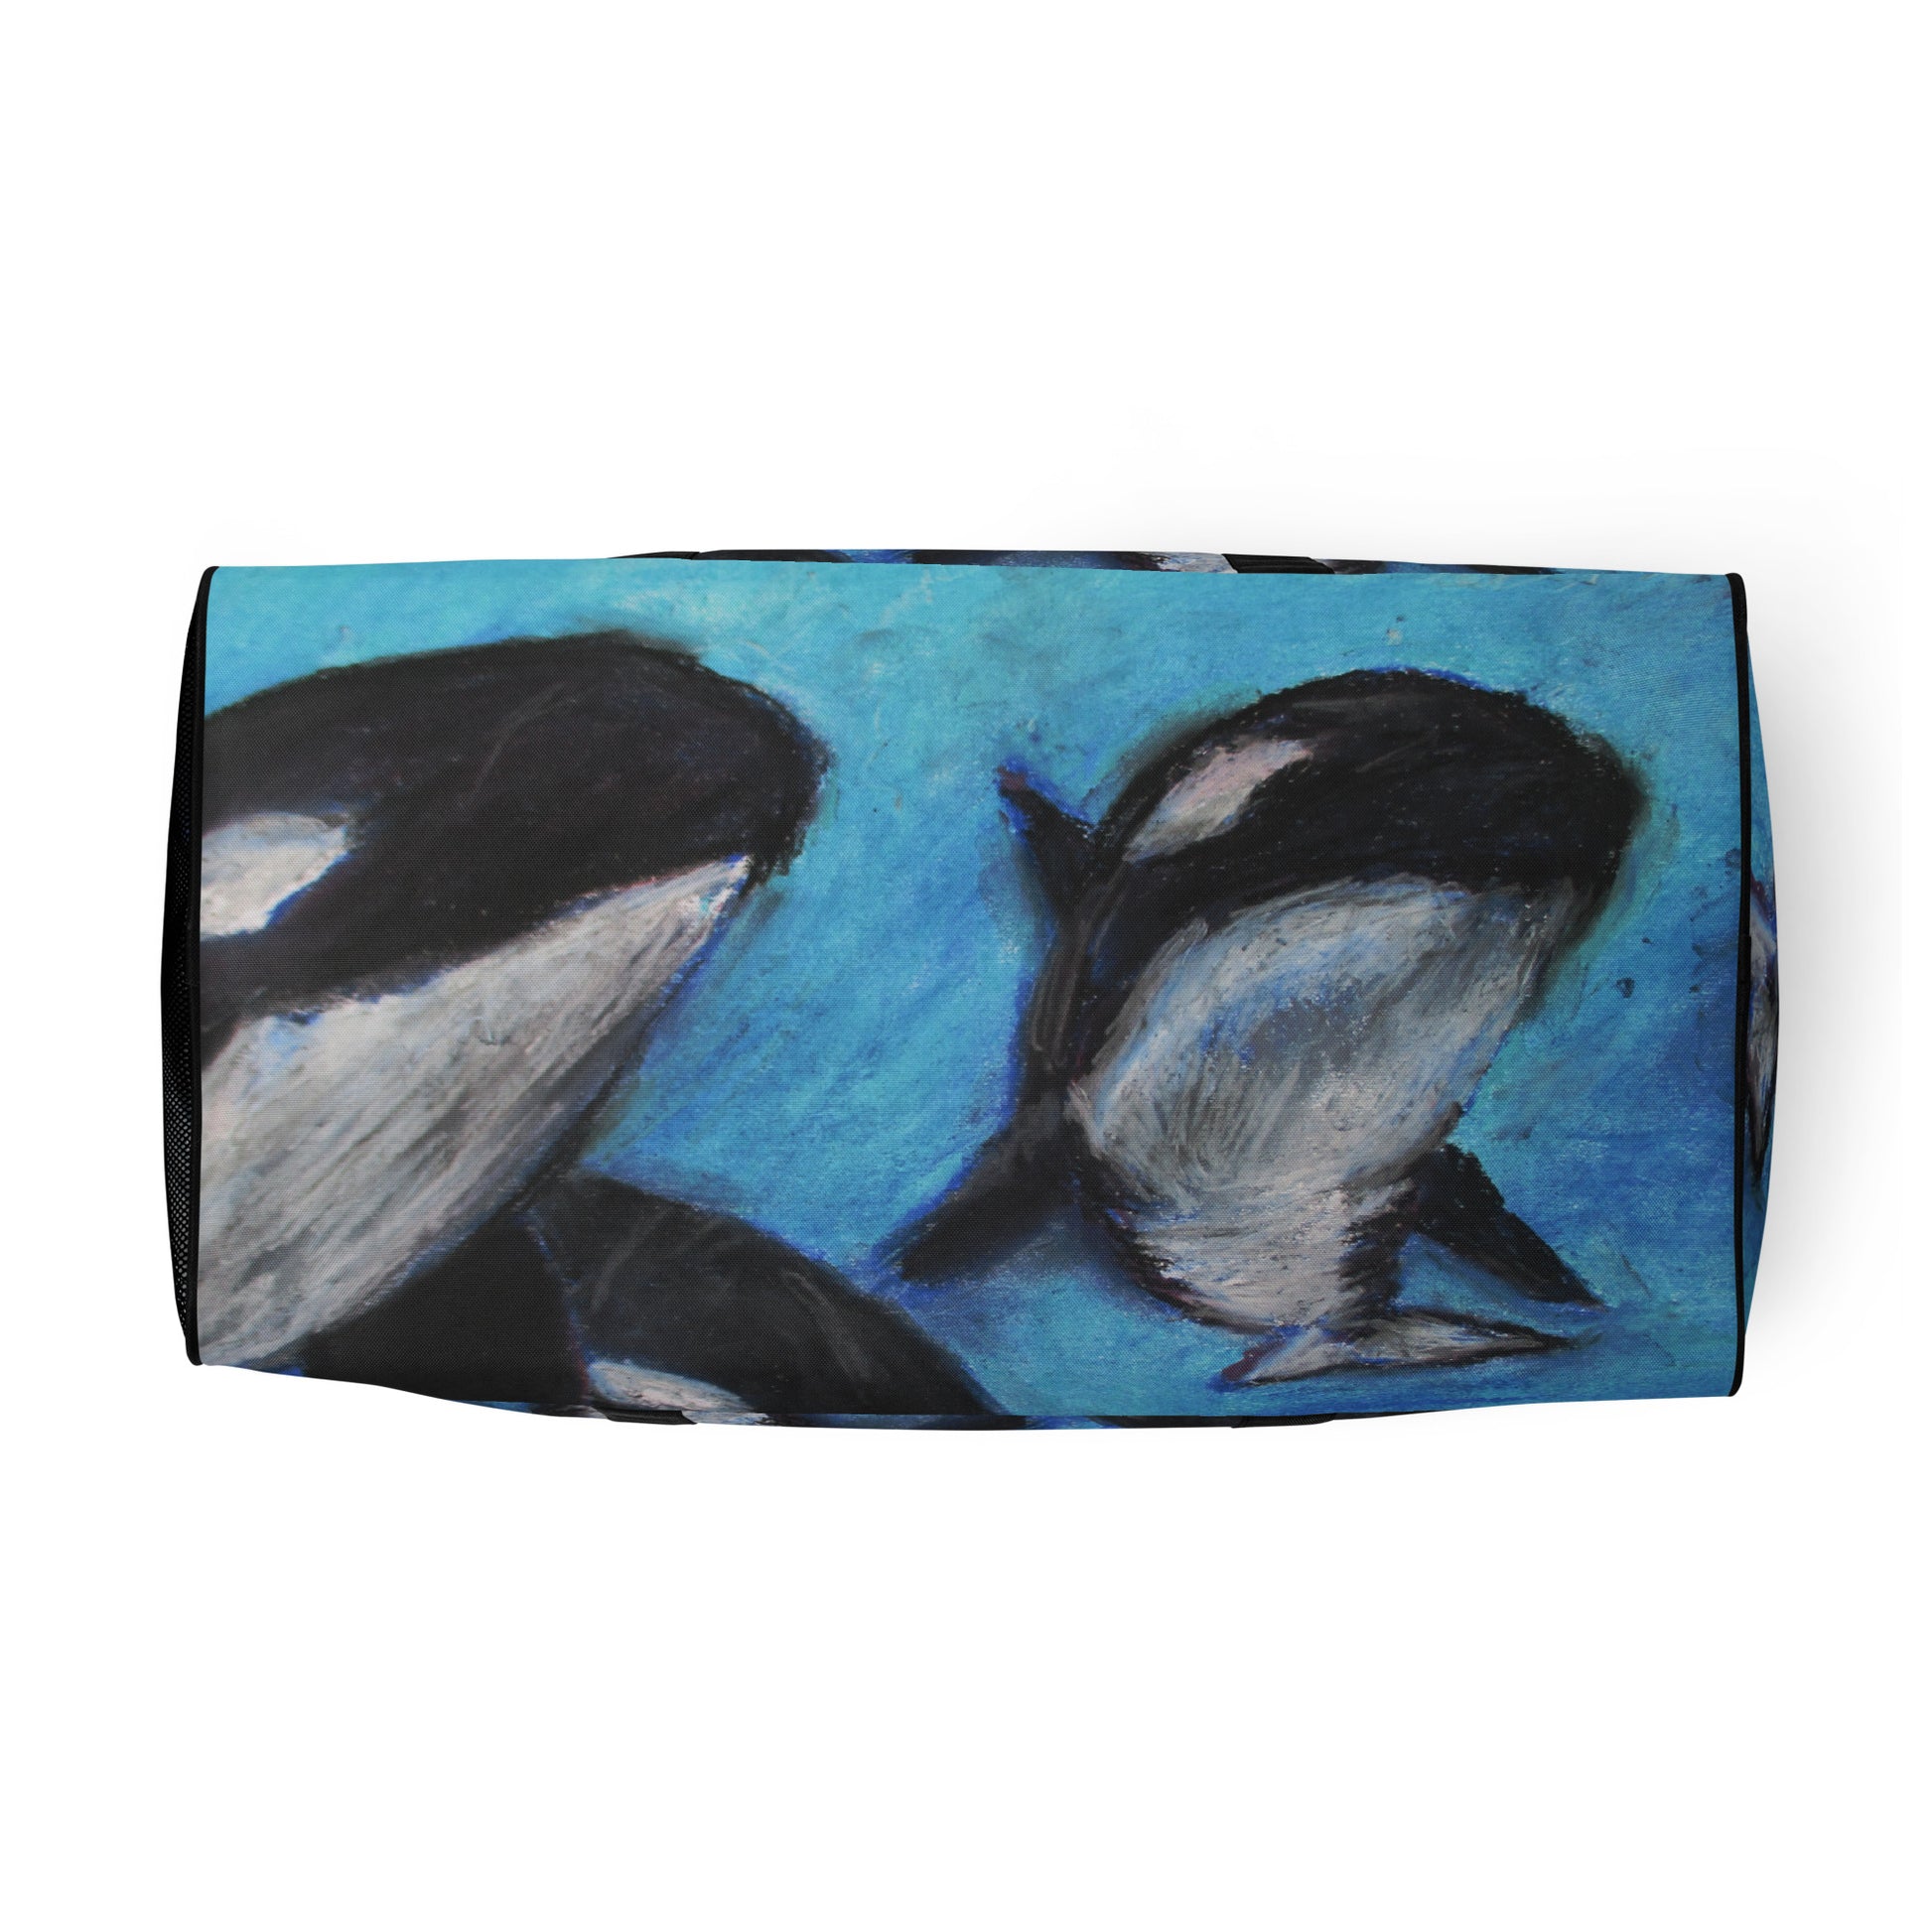 Poet and her Soul Speaking Paintings ~ prints, originals and more  Taking rides On the tides With orca calls Free with no walls Deep sea to the sea sides   Artwork and Poetry of Artist Jen Shearer   This is a original soft pastel painting printed on merchandise.